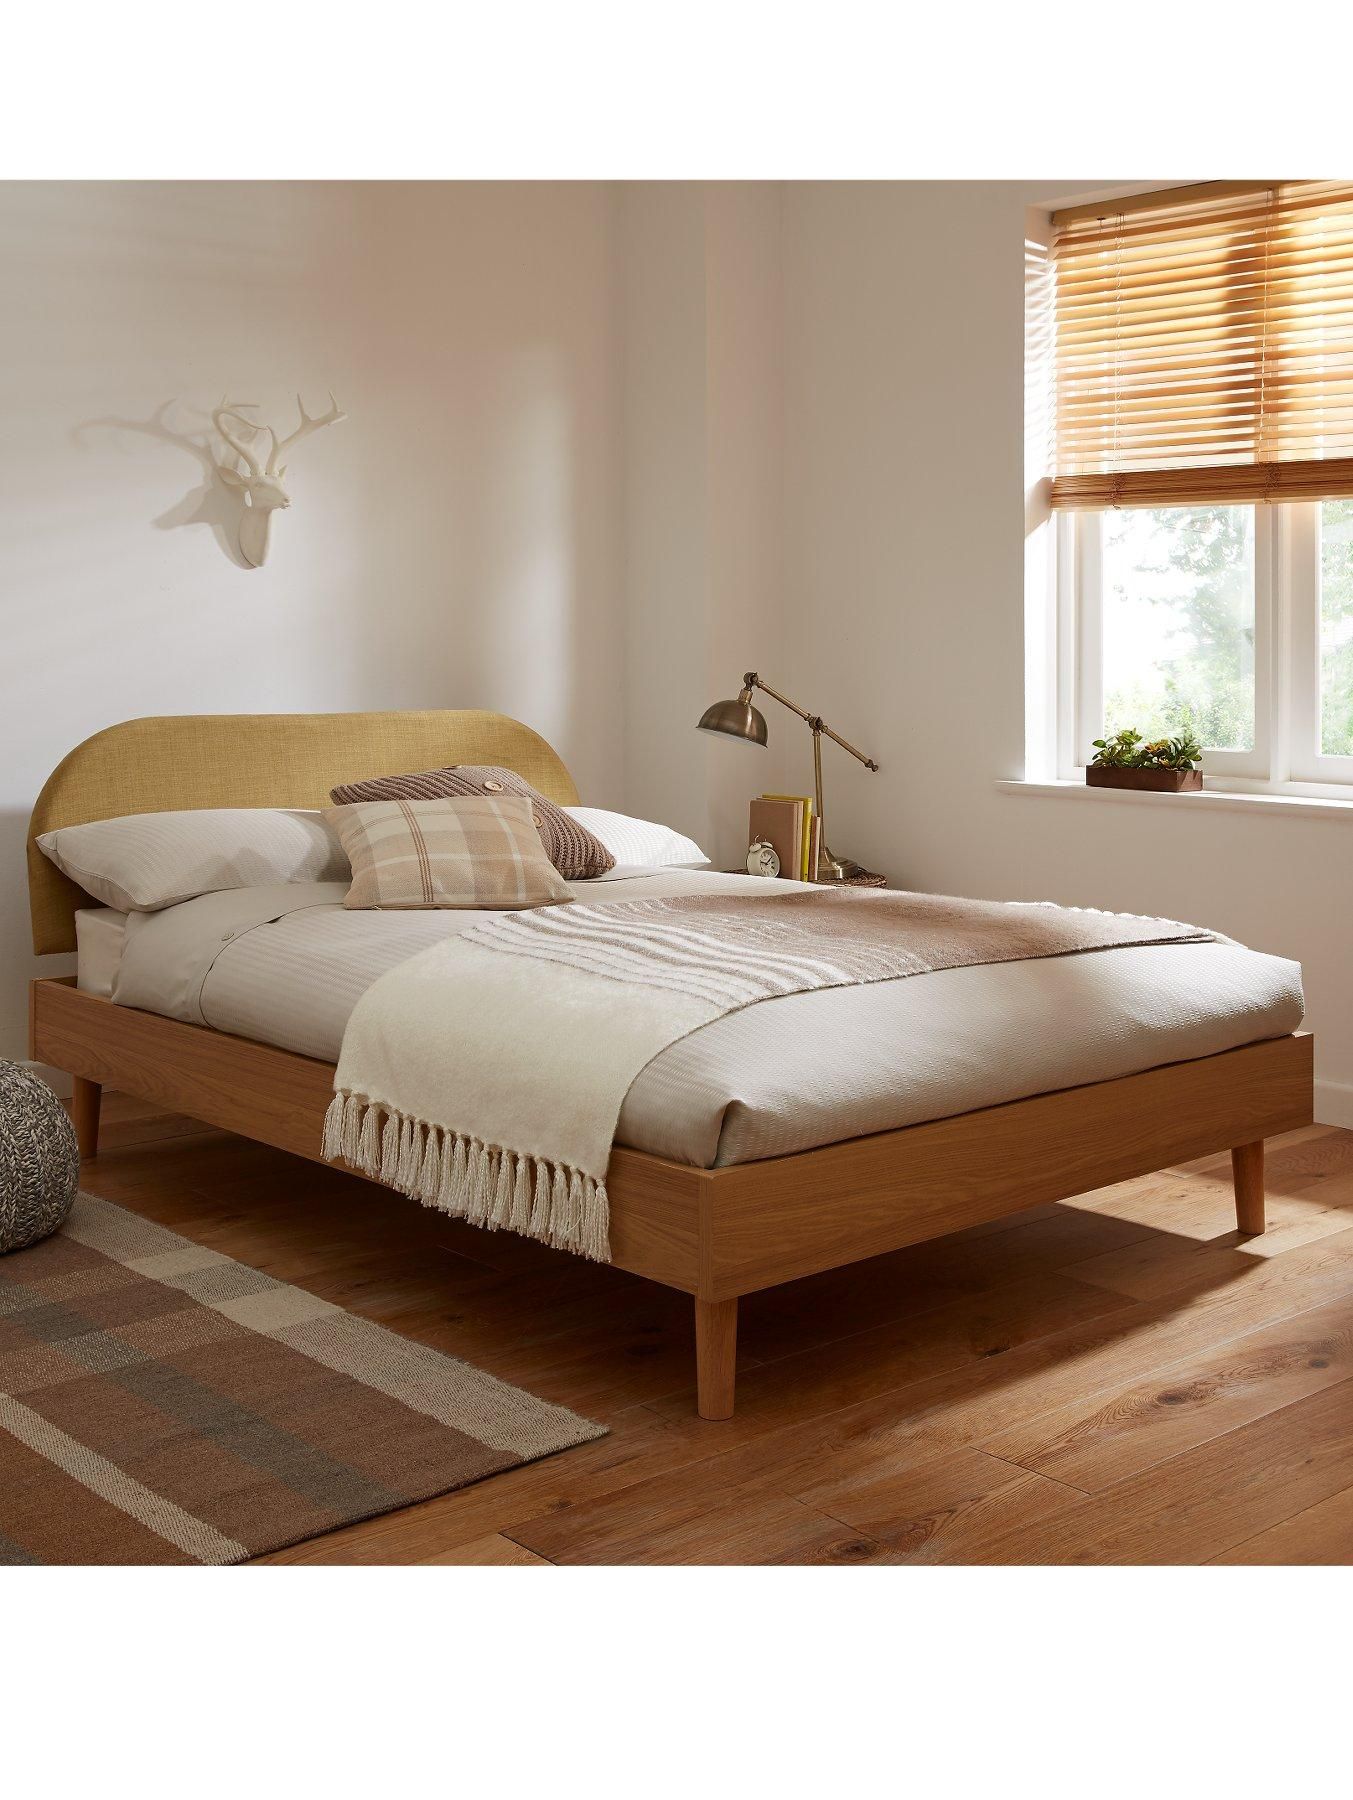 15 Iconic Scandinavian Bed Frame to Enhance Your Bedroom Decor